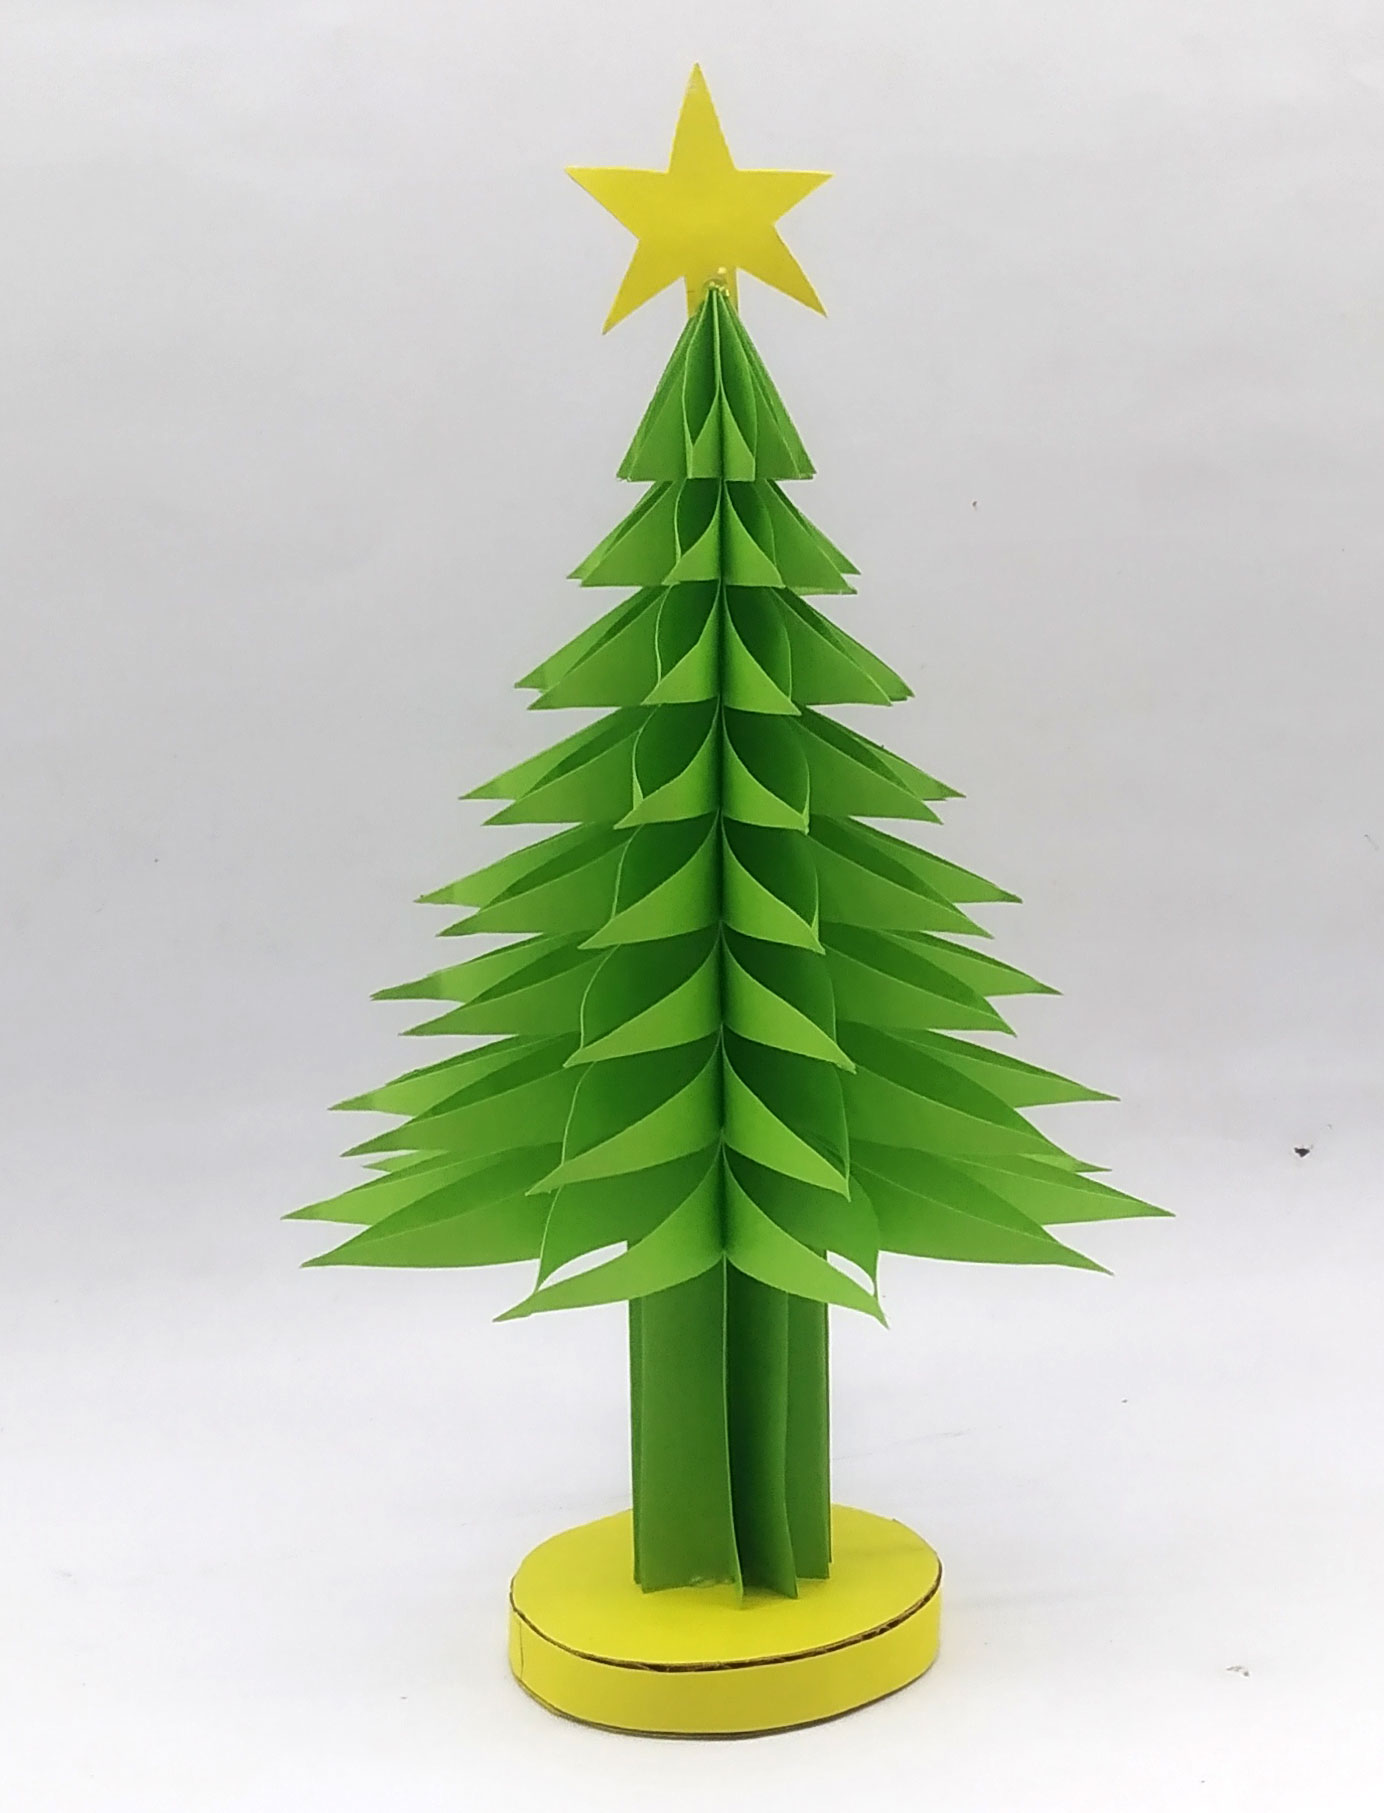 Paper 3d Christmas Tree Craft How To Make Paper Xmas Craft Best Diy